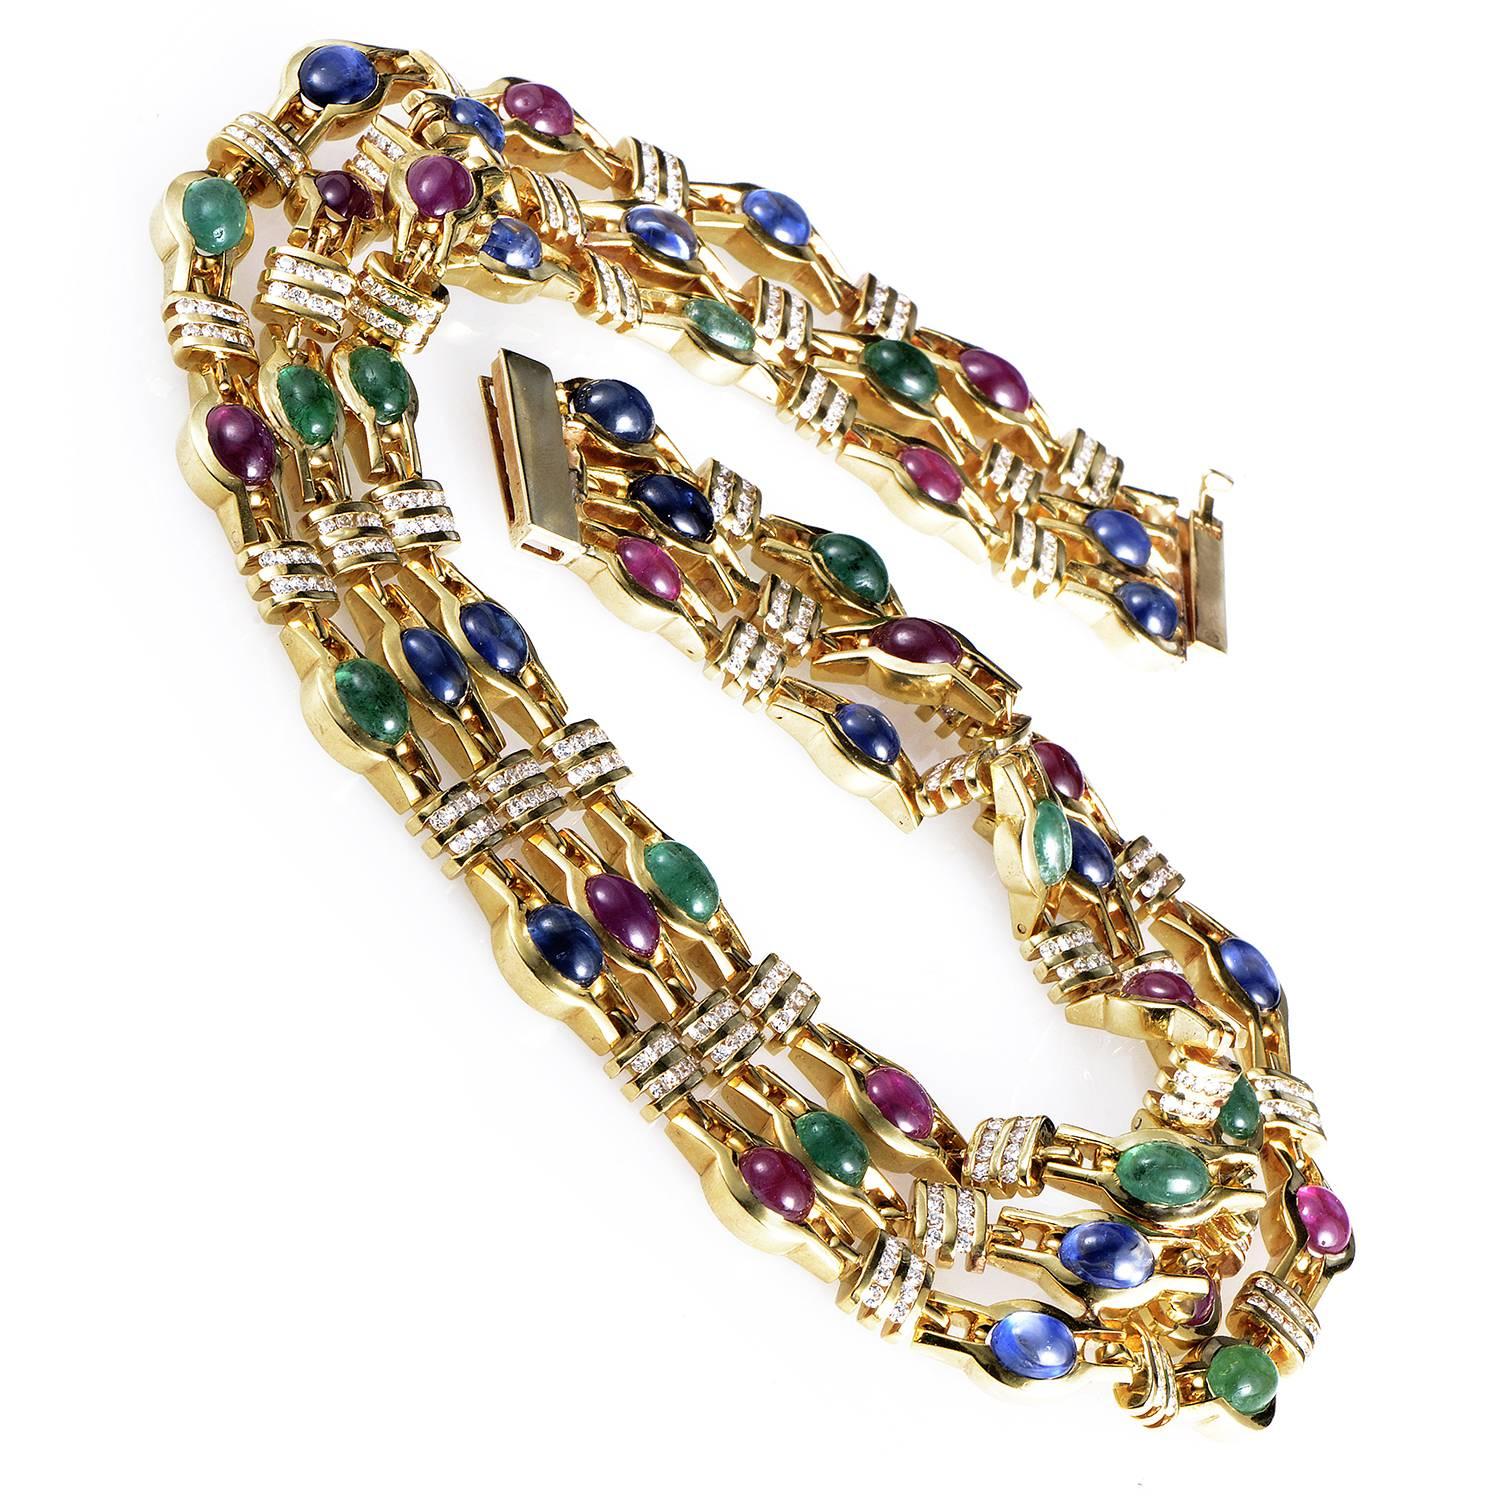 Epitomizing tasteful glamour and lavish luxury in a flamboyant and charming design, this outstanding necklace is made of 18K yellow gold with 6.20 carats of glittering diamonds, 15.00 carats of splendid emeralds, stunning sapphires weighing in total